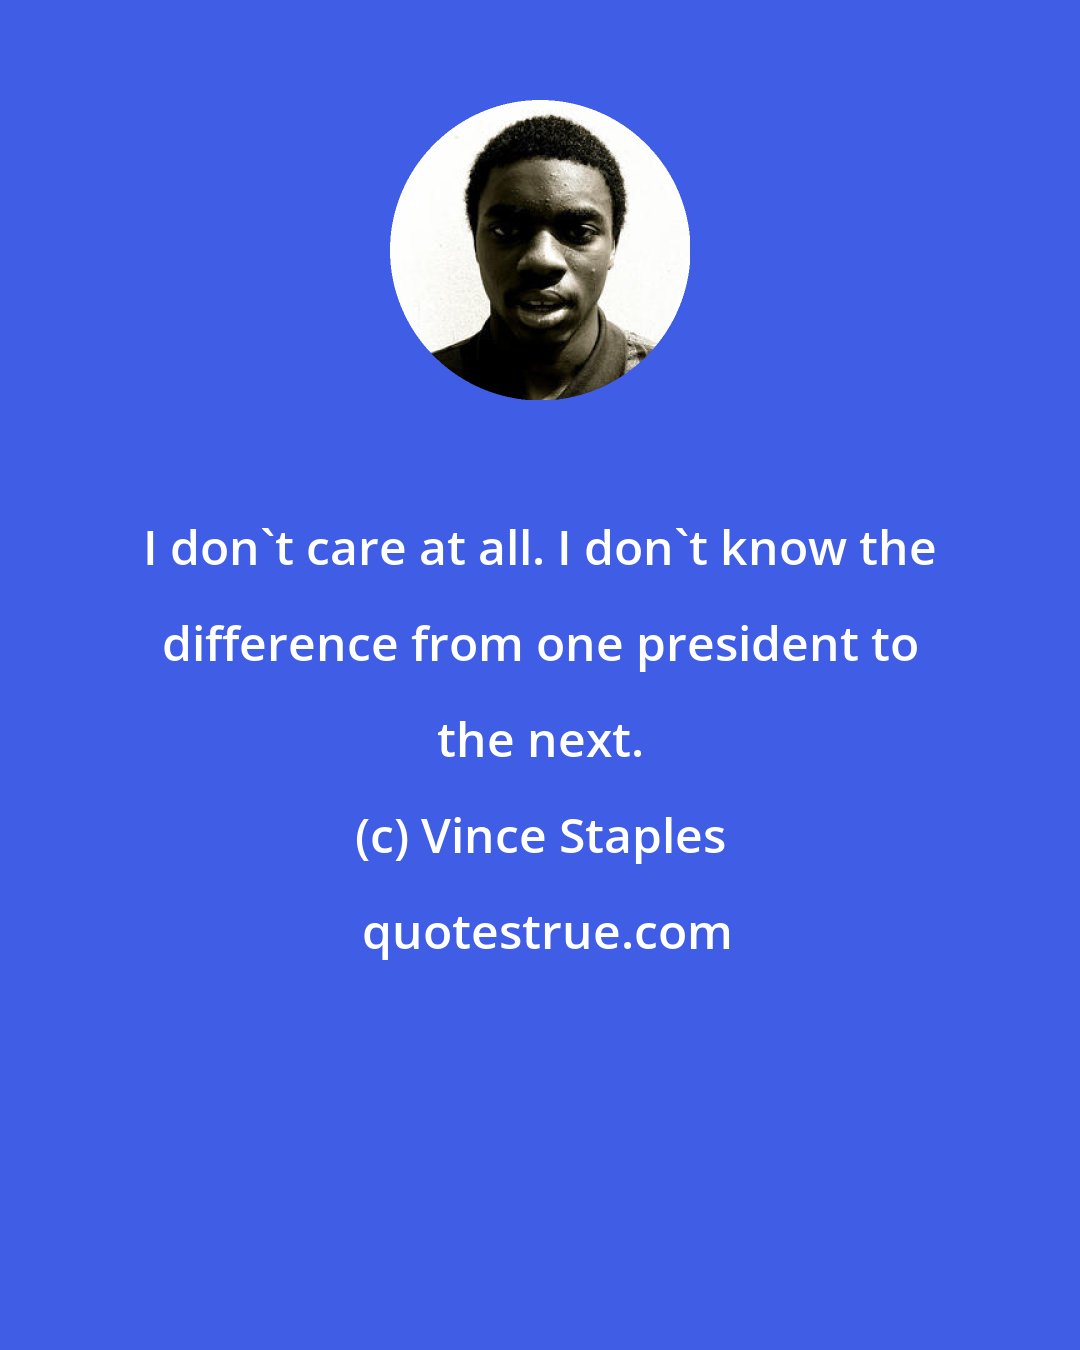 Vince Staples: I don't care at all. I don't know the difference from one president to the next.